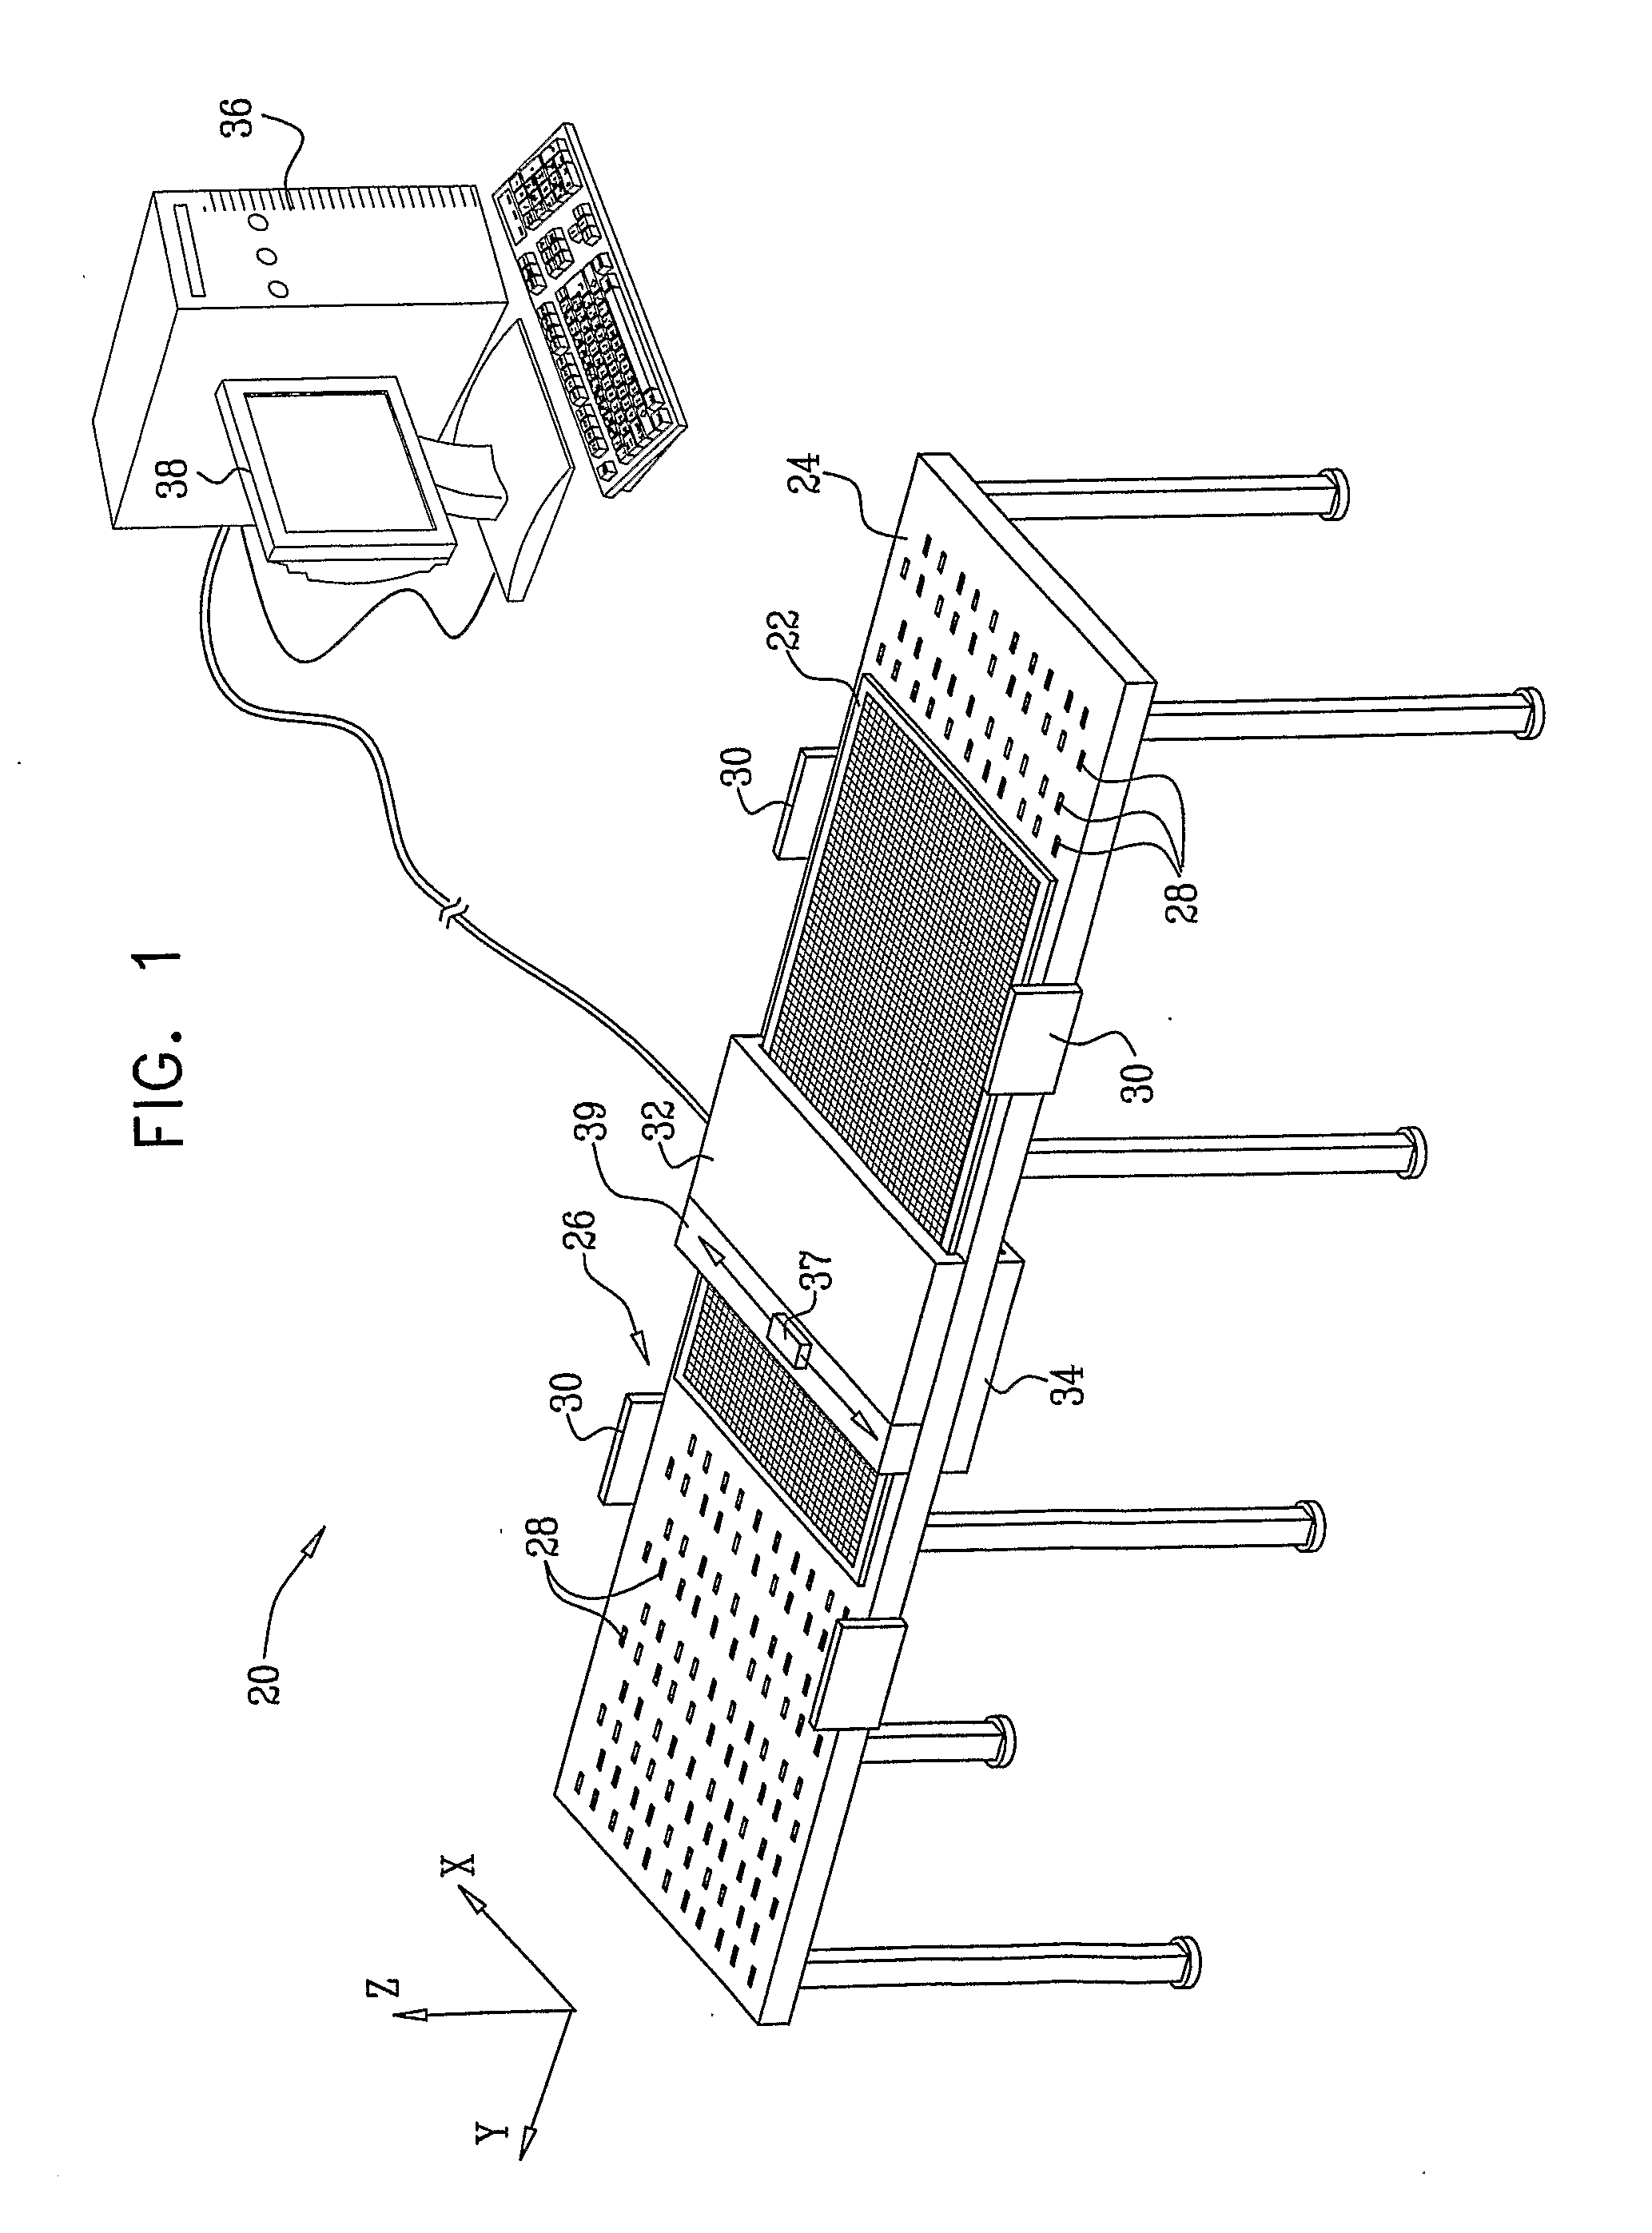 Inspection of a substrate using multiple cameras